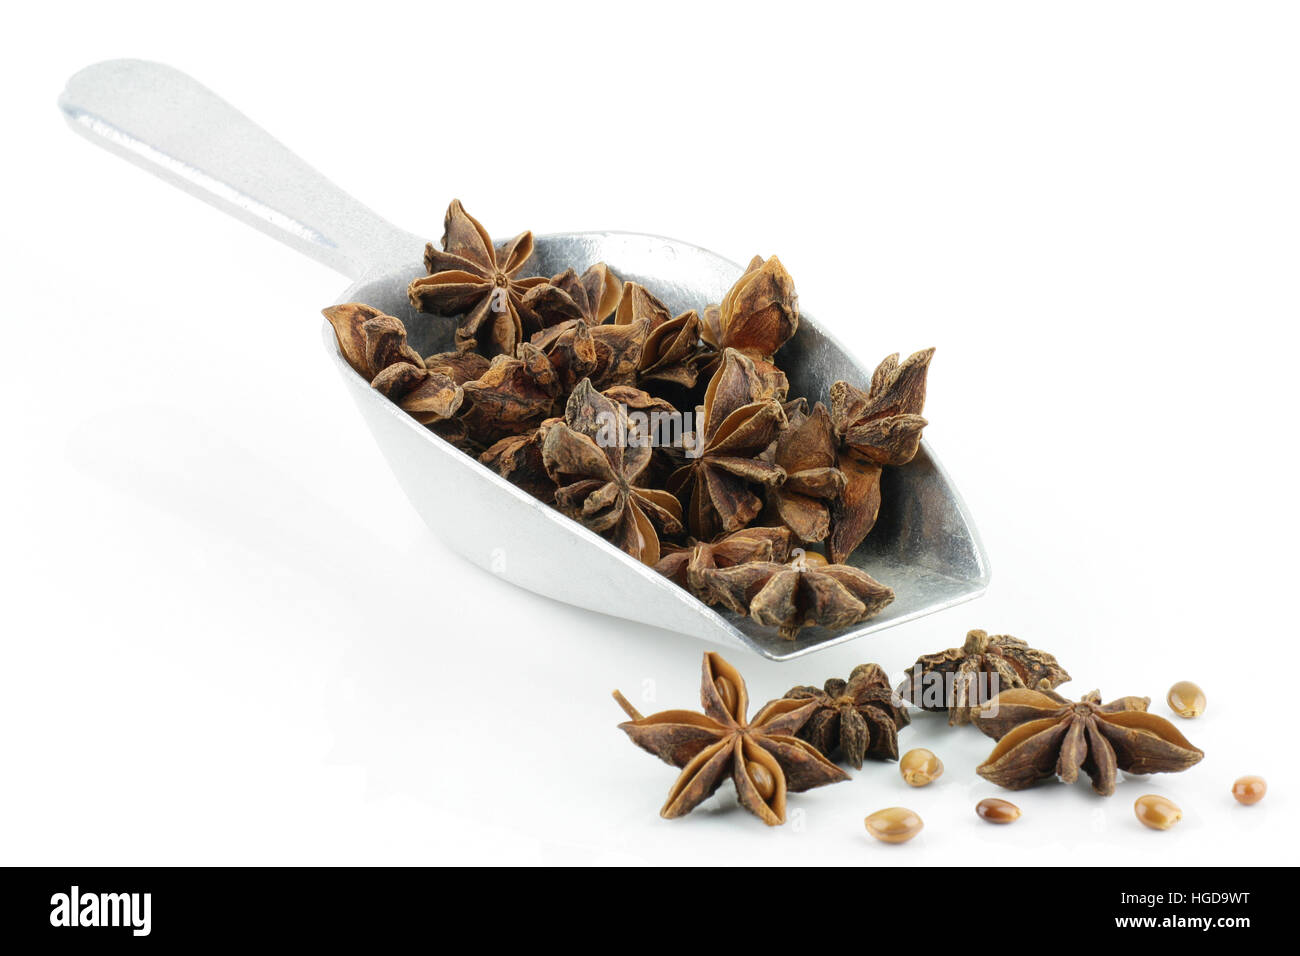 Star anise in an aluminium grocery scoop. On a white background. Stock Photo